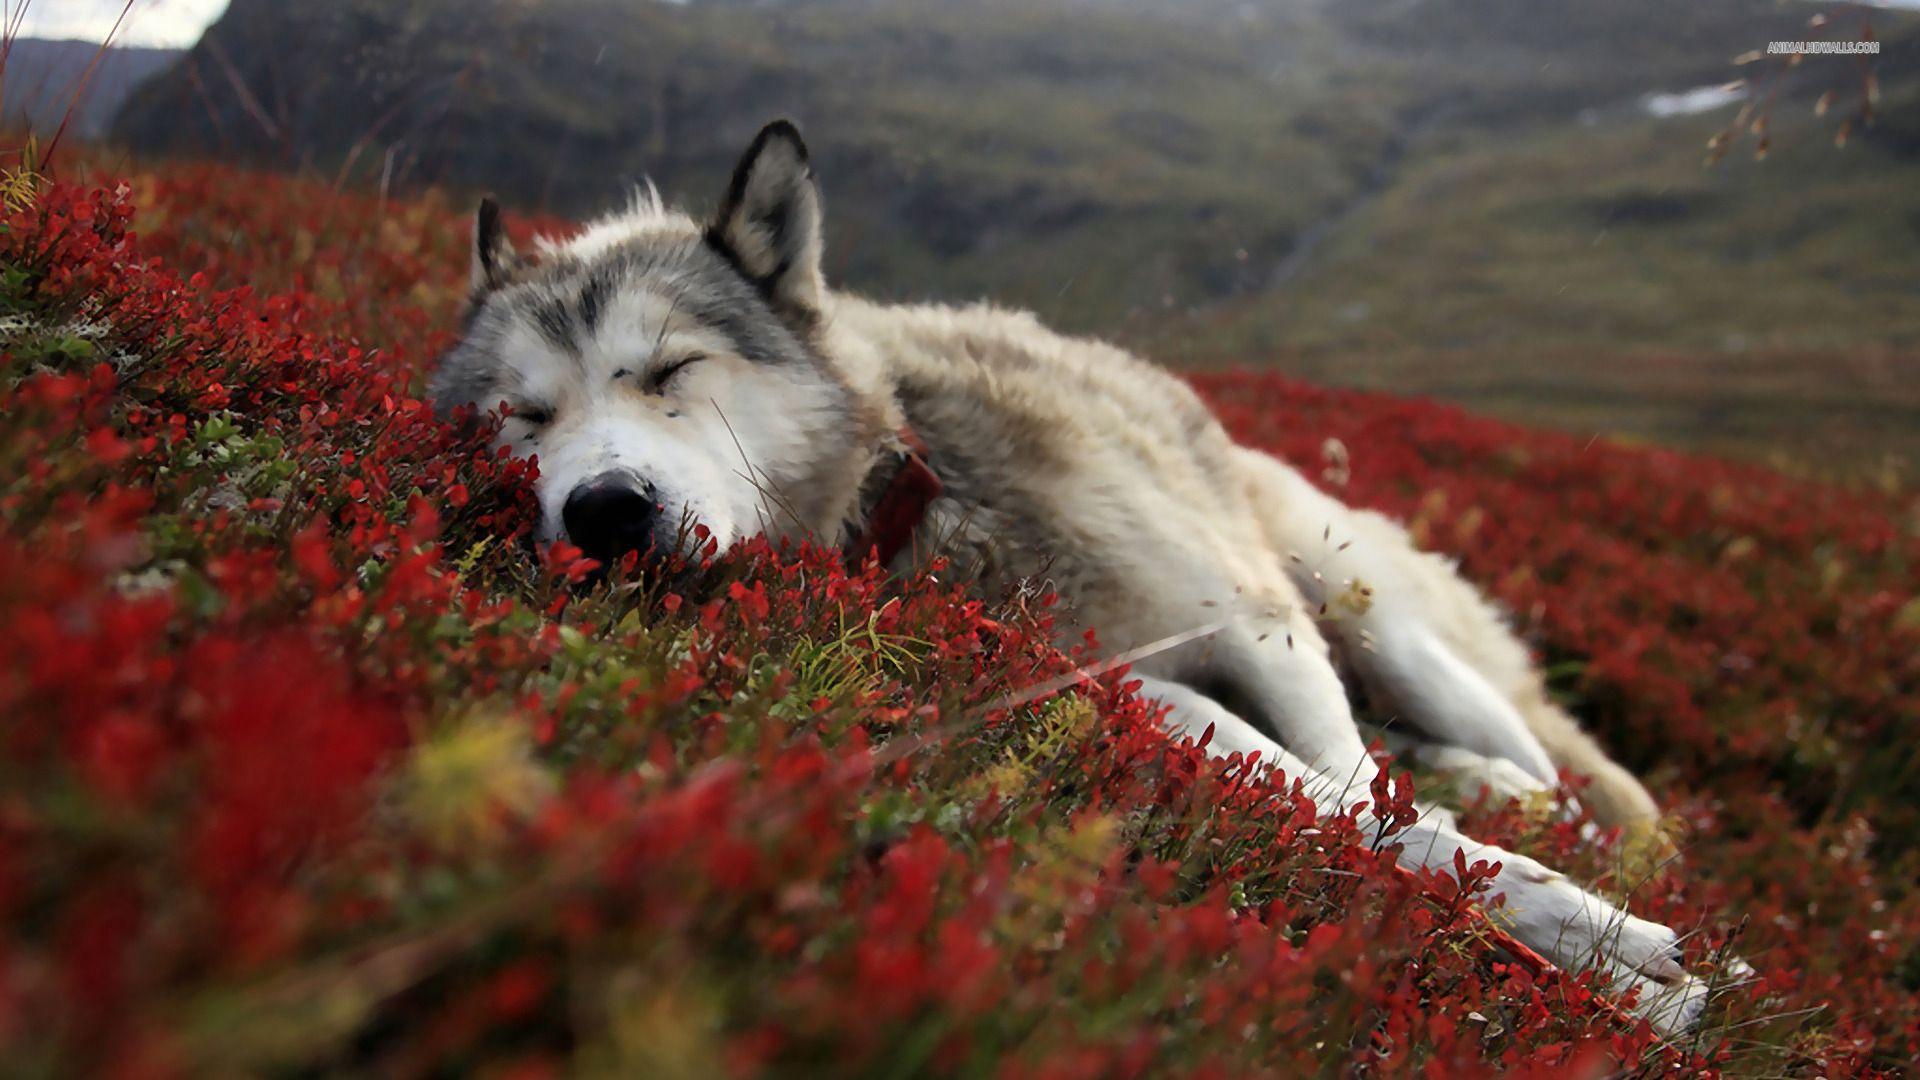 15 Greatest cute wallpaper wolf You Can Save It At No Cost - Aesthetic ...